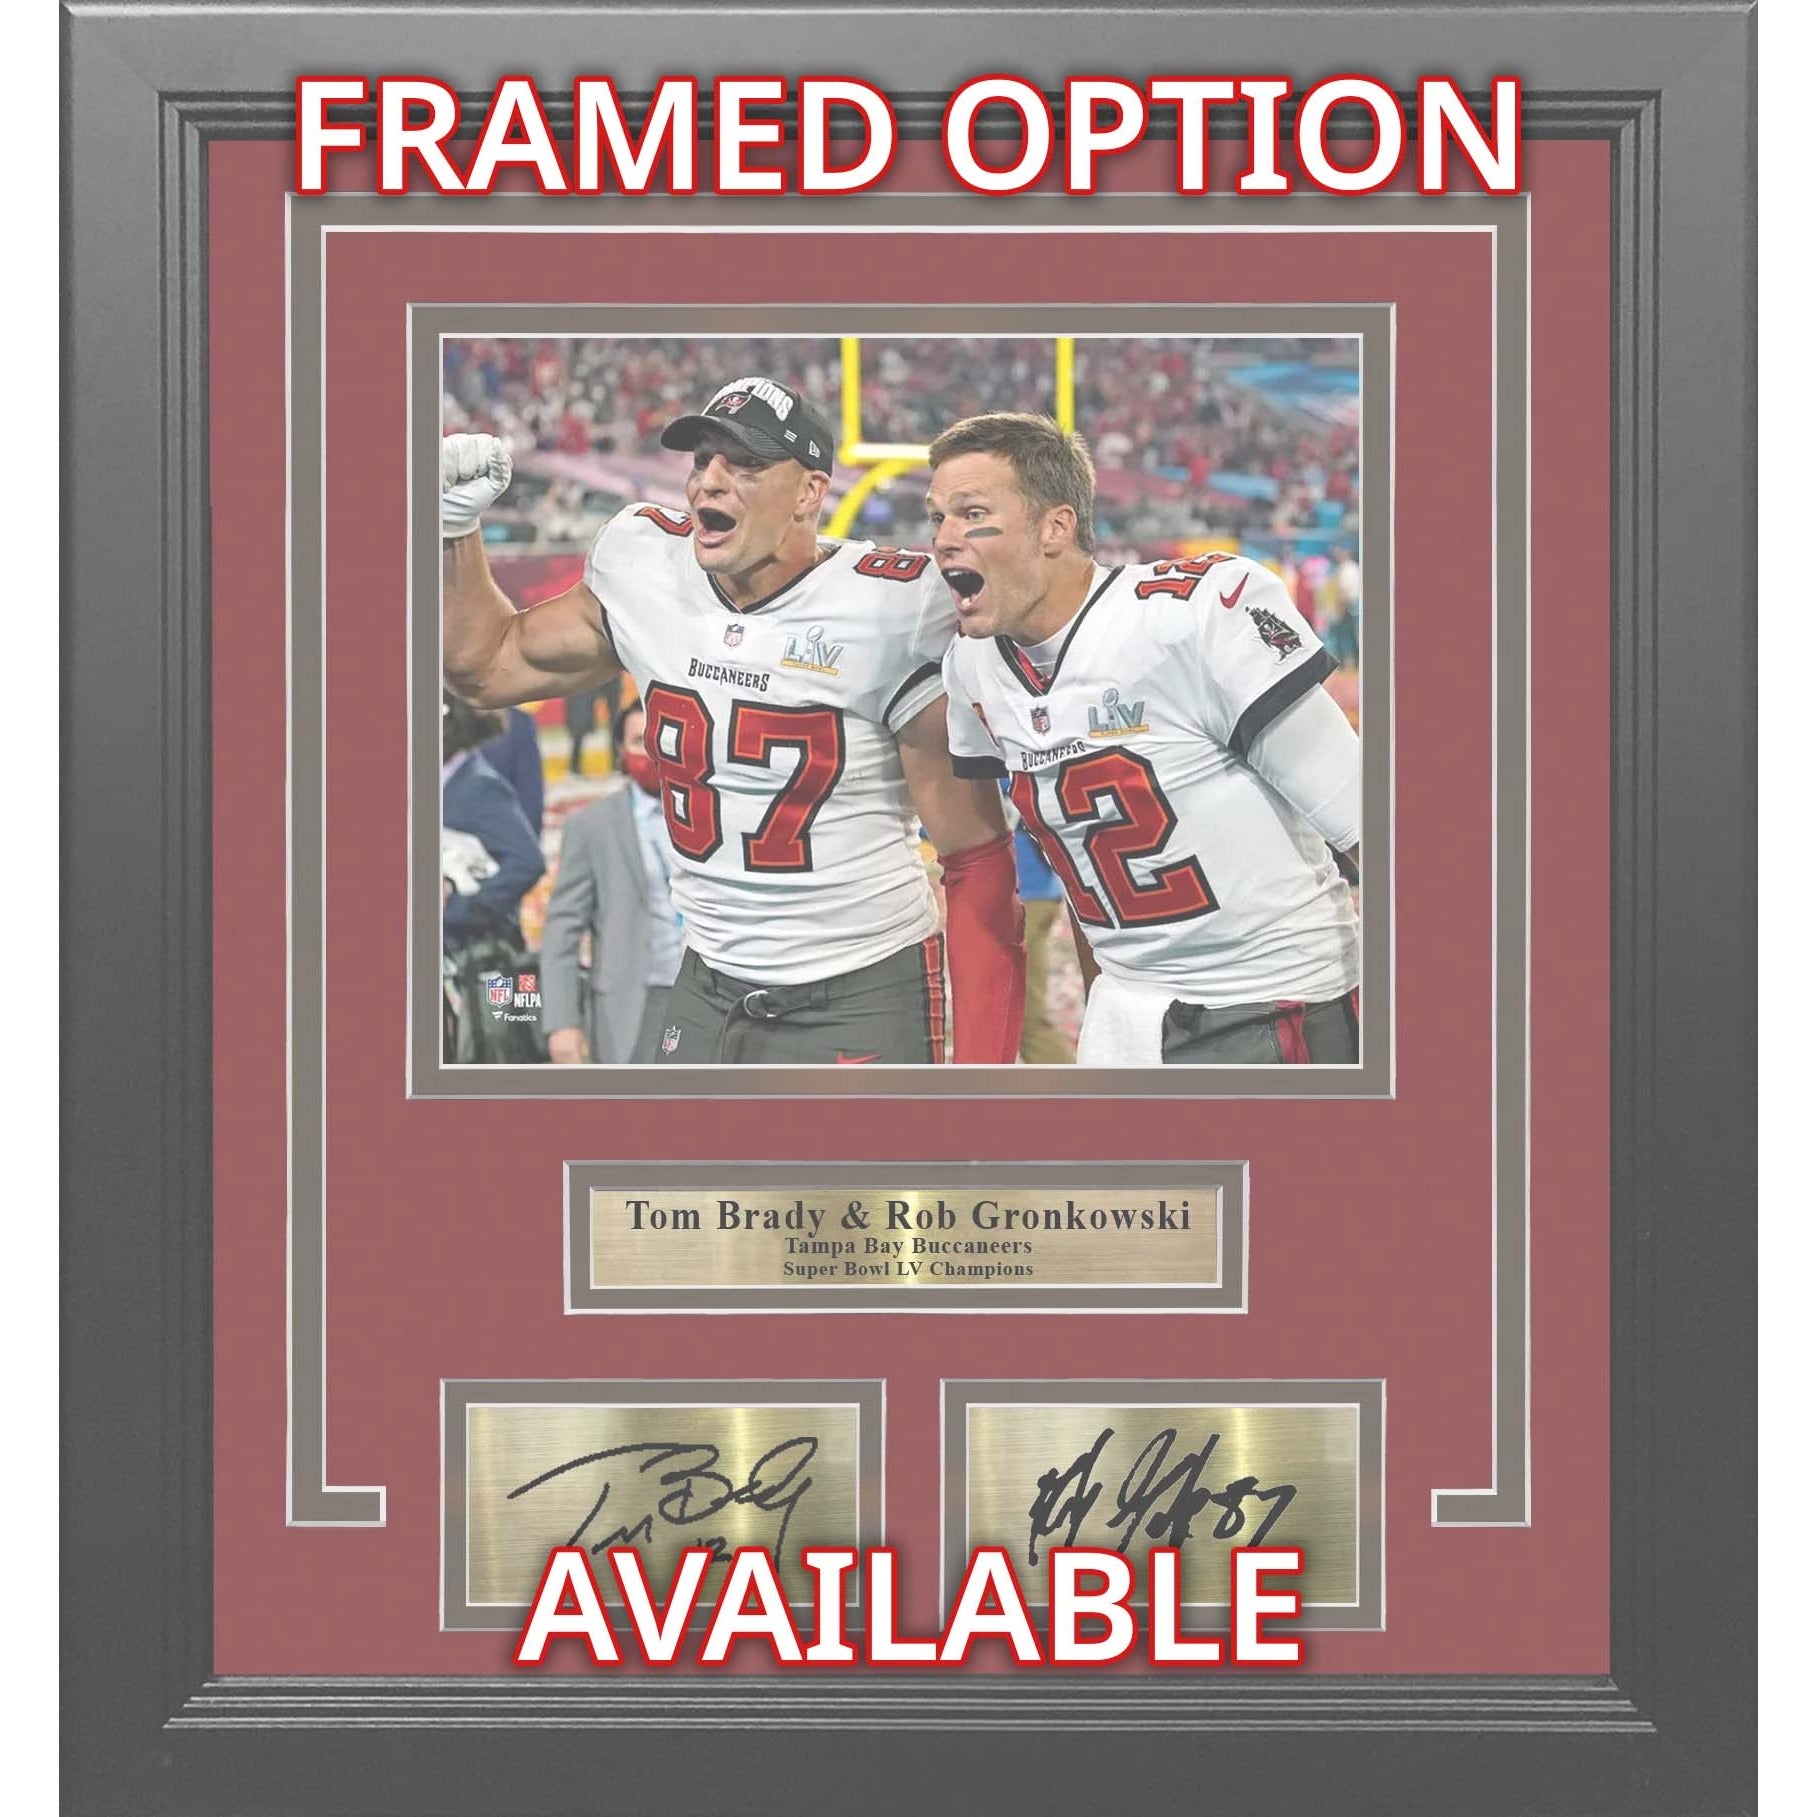 Rob Gronkowski Tom Brady New England Patriots Super Bowl champions 8 by 10 photo signed with proof